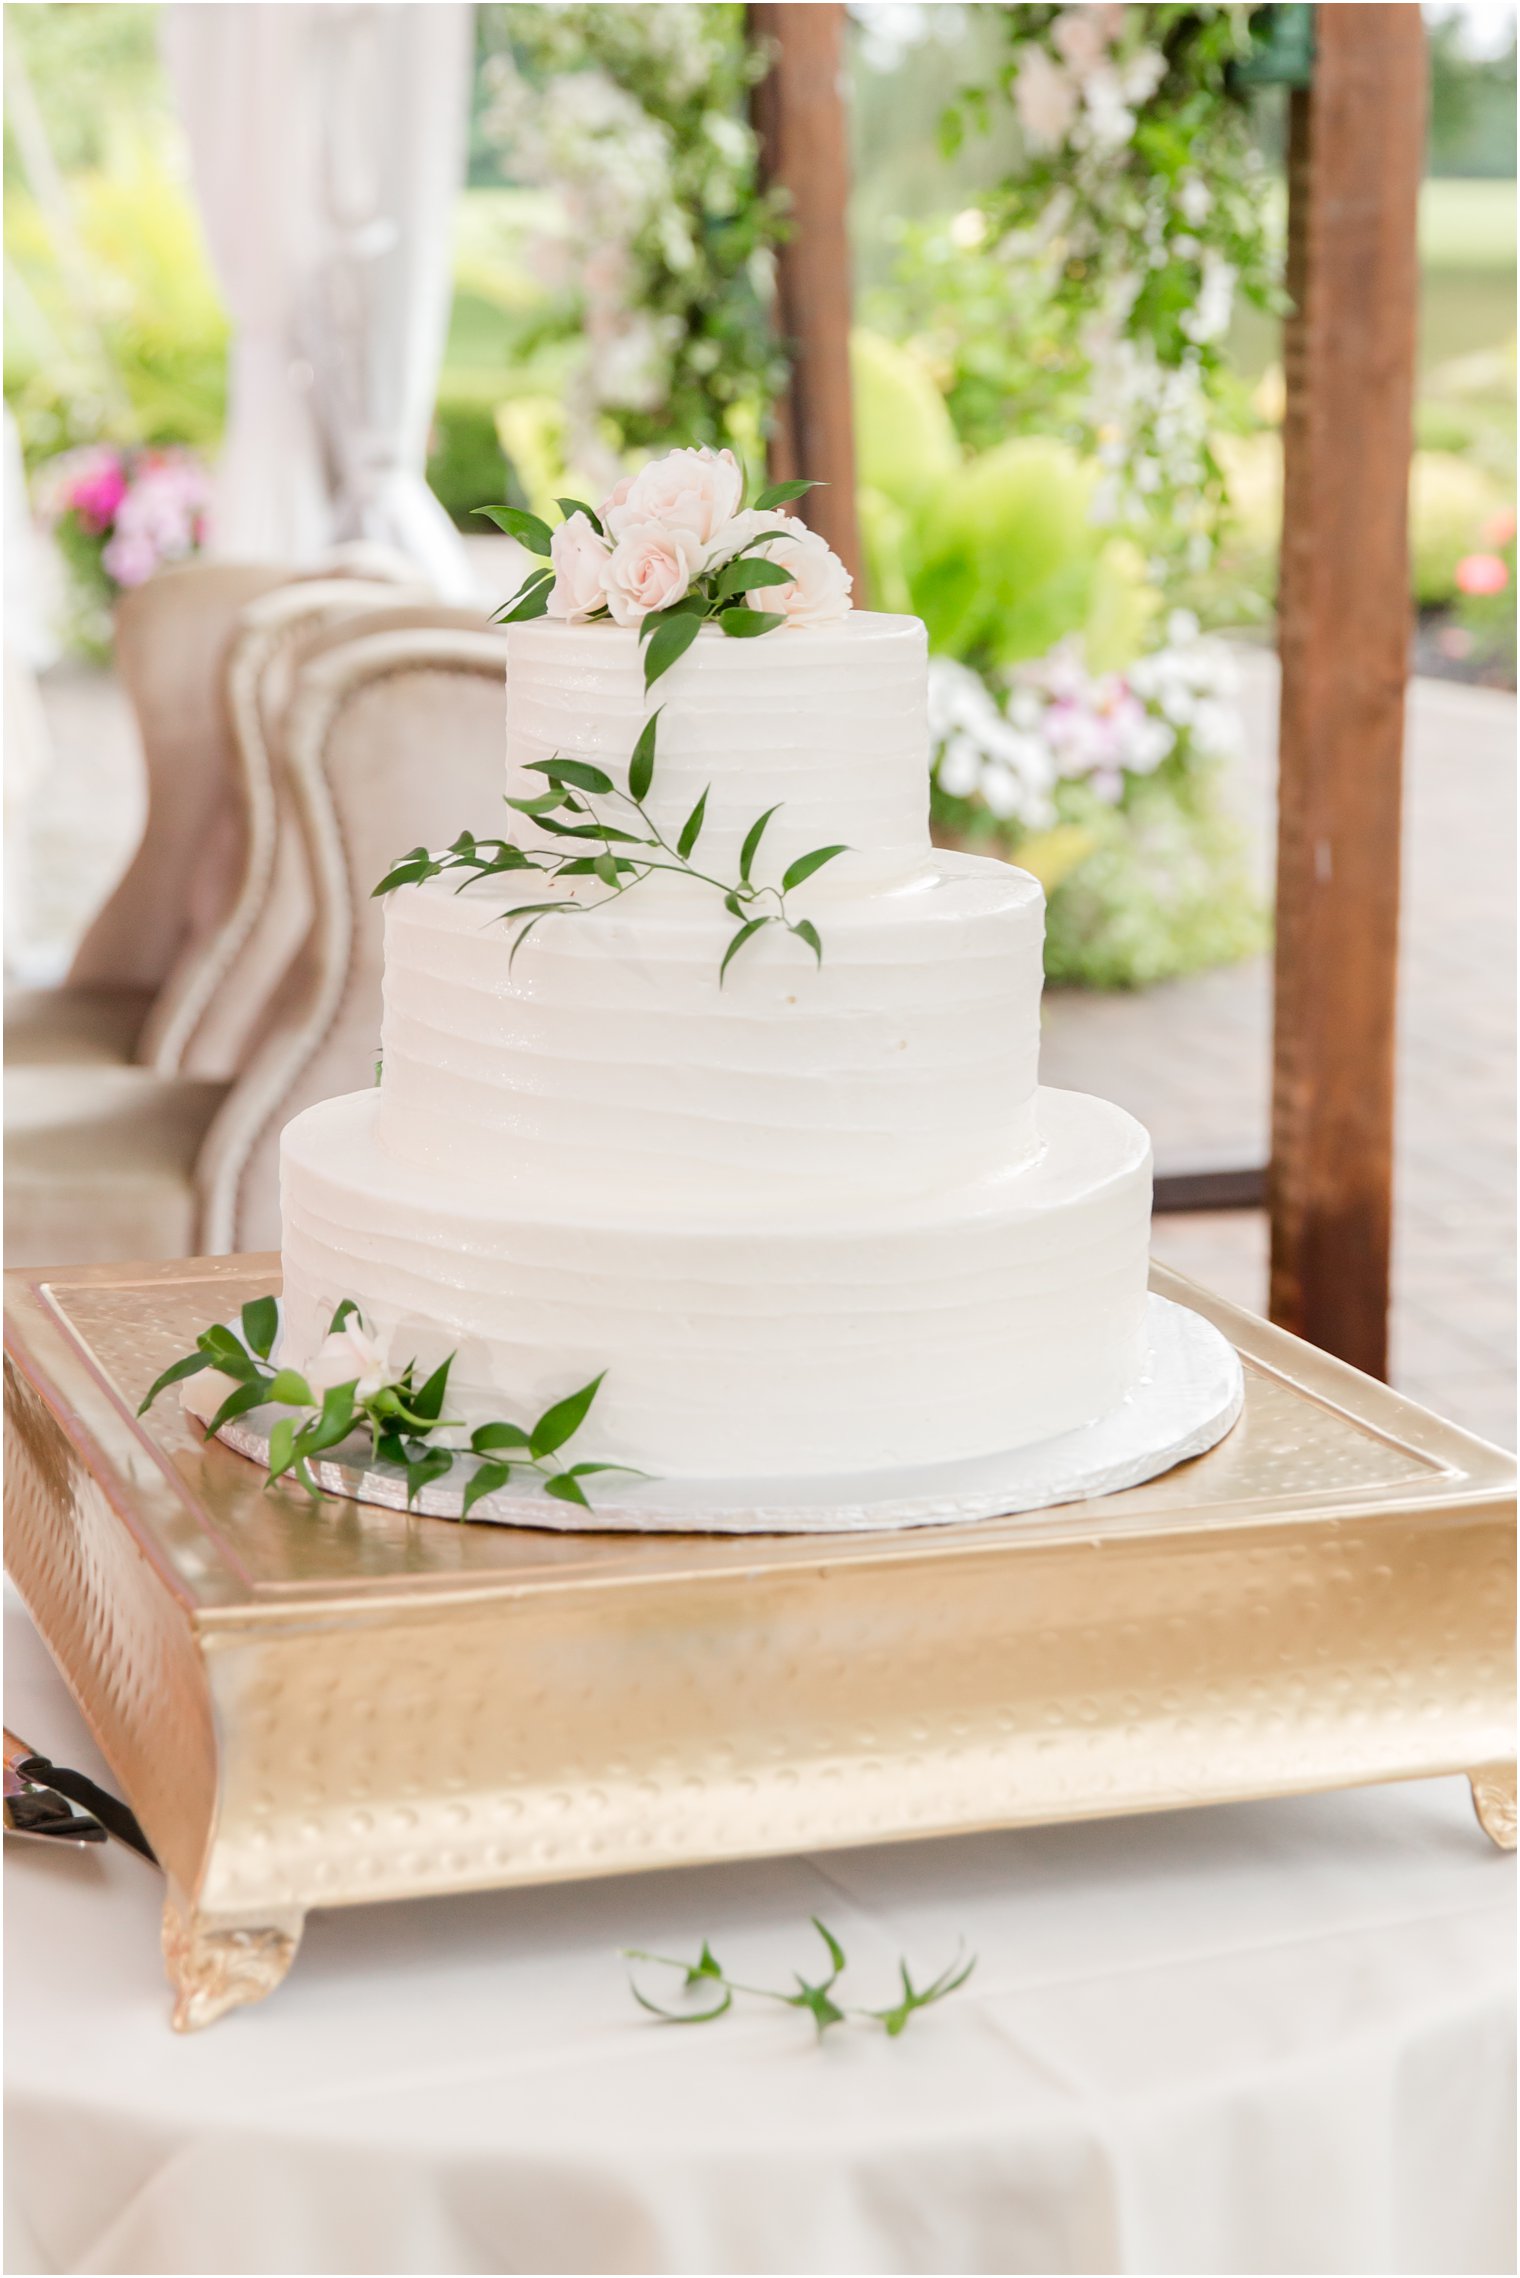 tiered wedding cake with white icing